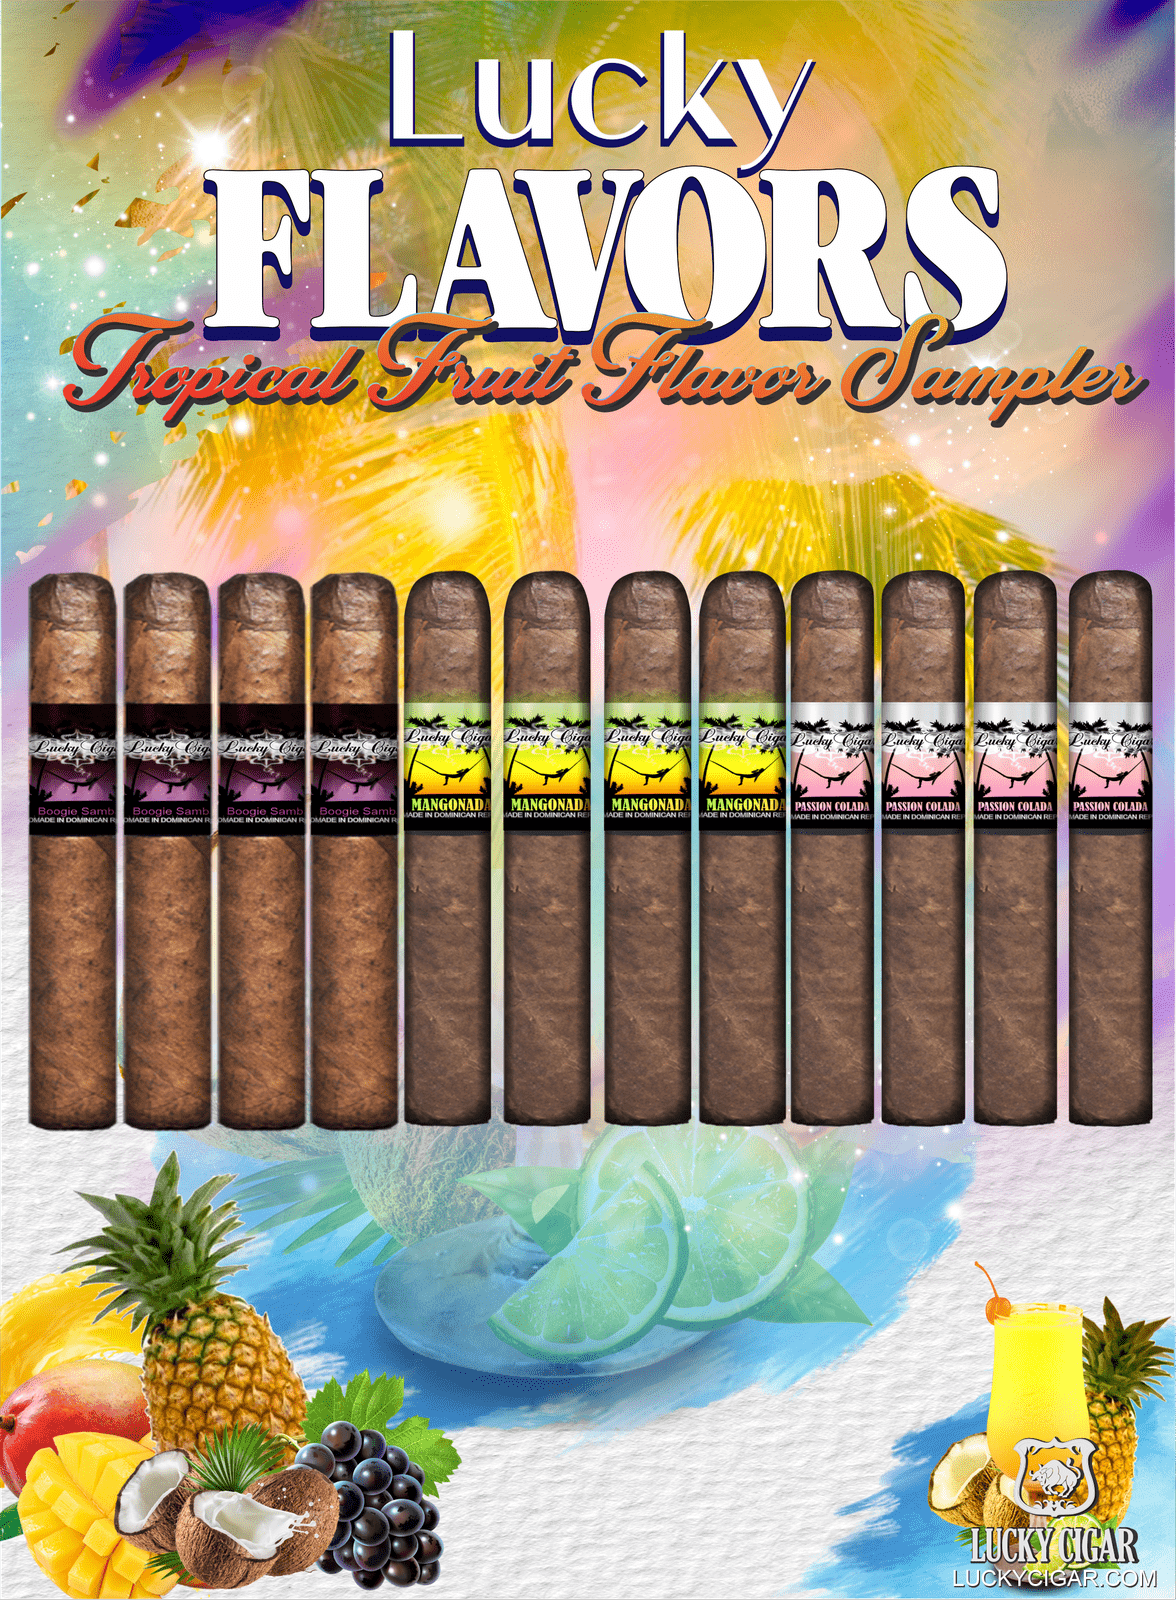 Flavored Cigars: Lucky Flavors 12 Piece Tropical Fruit Sampler - Boogie, Mangonada, Passion 4 Boogie Samba 5x42 Cigars 4 Mangonada 5x42 Cigars 4 Passion Colada 5x42 Cigars